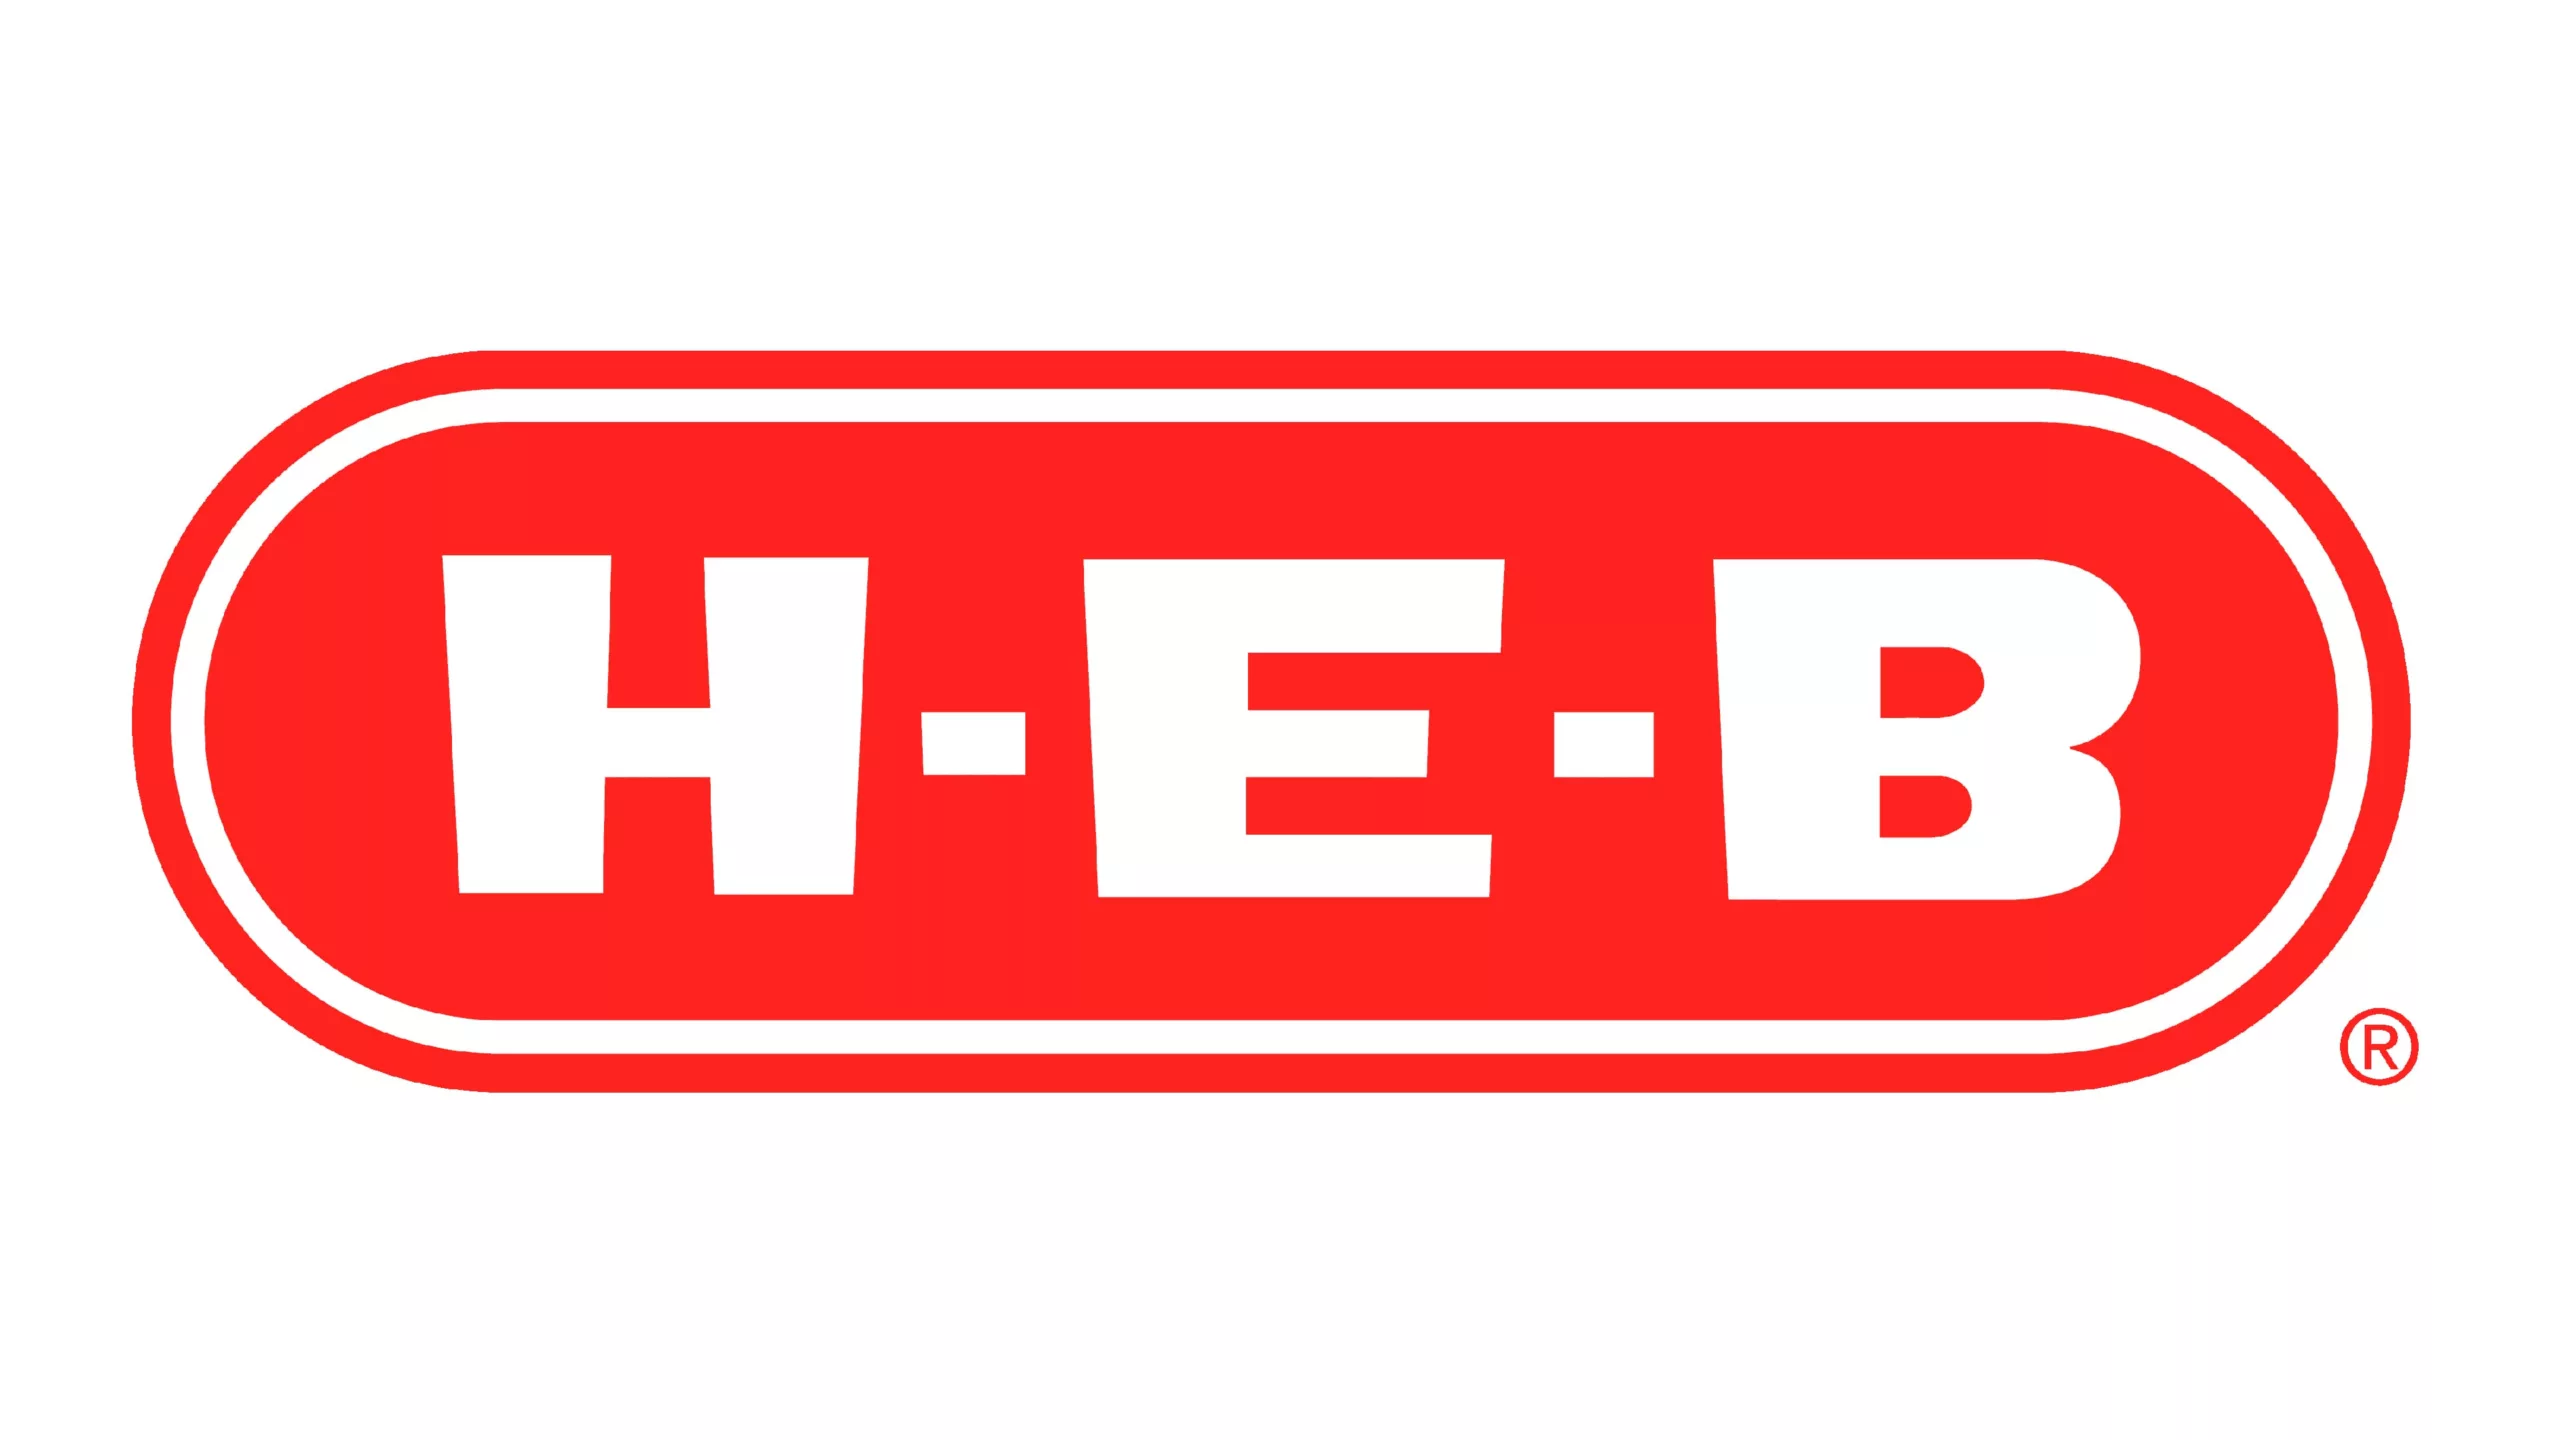 H-E-B grocery logo: red oval, 'H-E-B' in white text